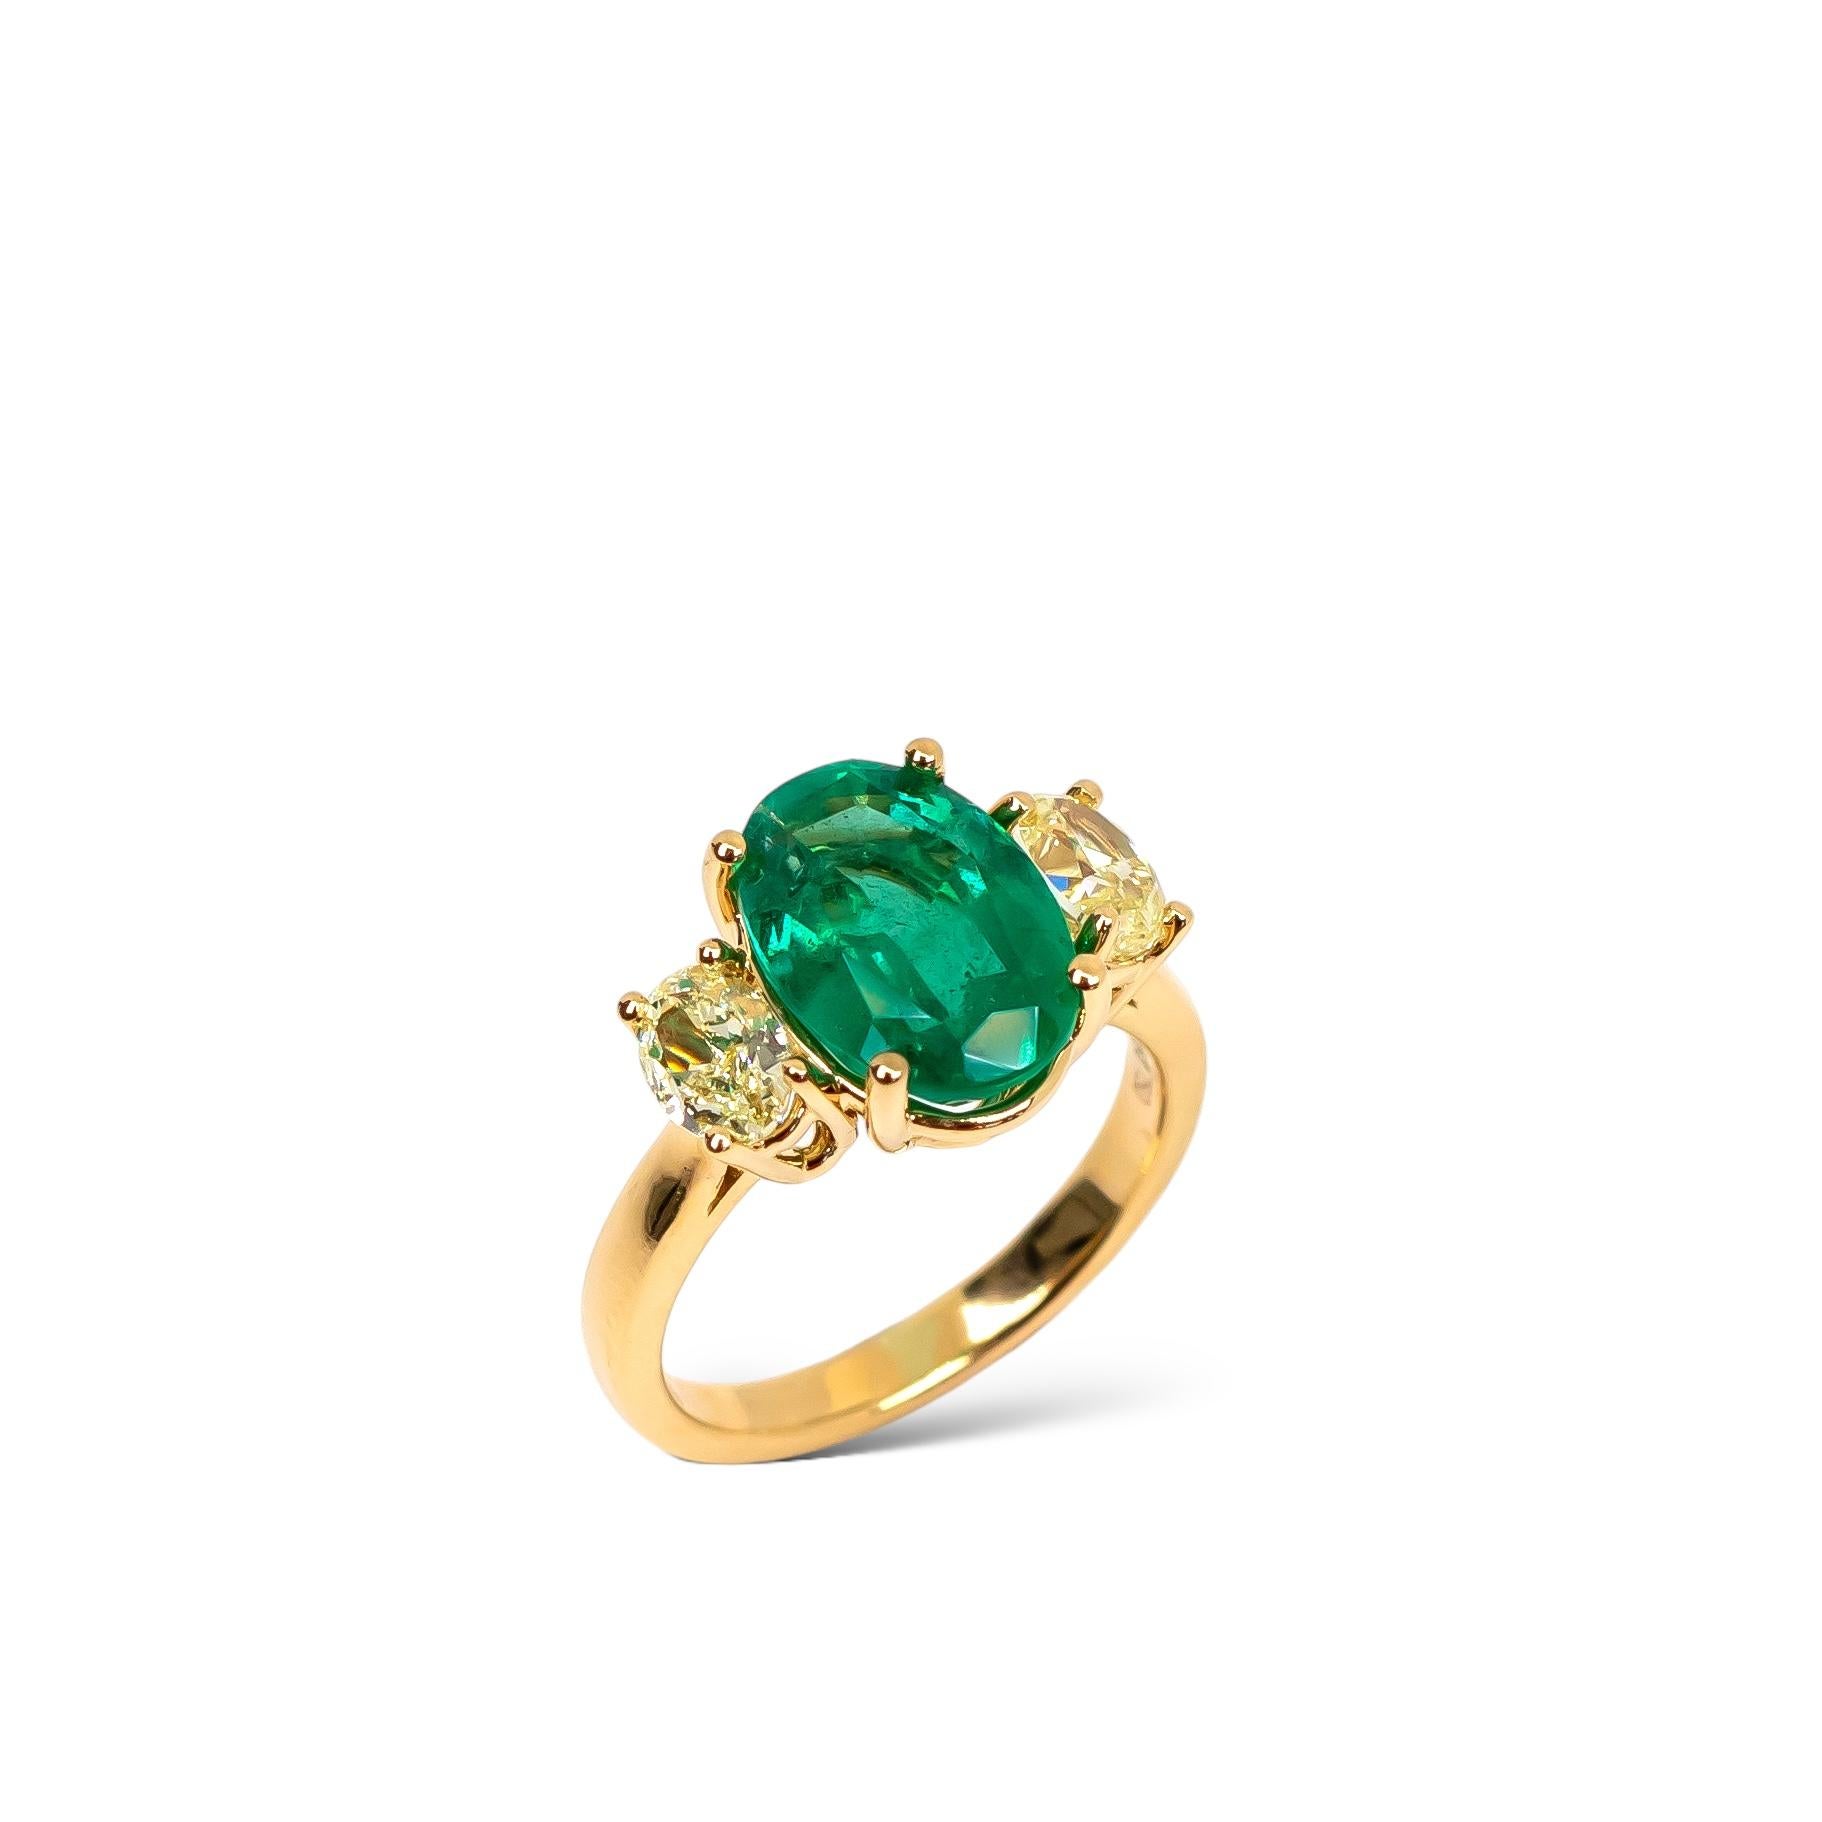 Beautiful oval Colombian emerald 3.54 carat set with two fancy yellow diamonds. The emerald colour is a medium-dark tone slightly blue-green. 

Details: 

The Colombian emerald has an incredible green colour and glow to it.

Colombian emeralds are